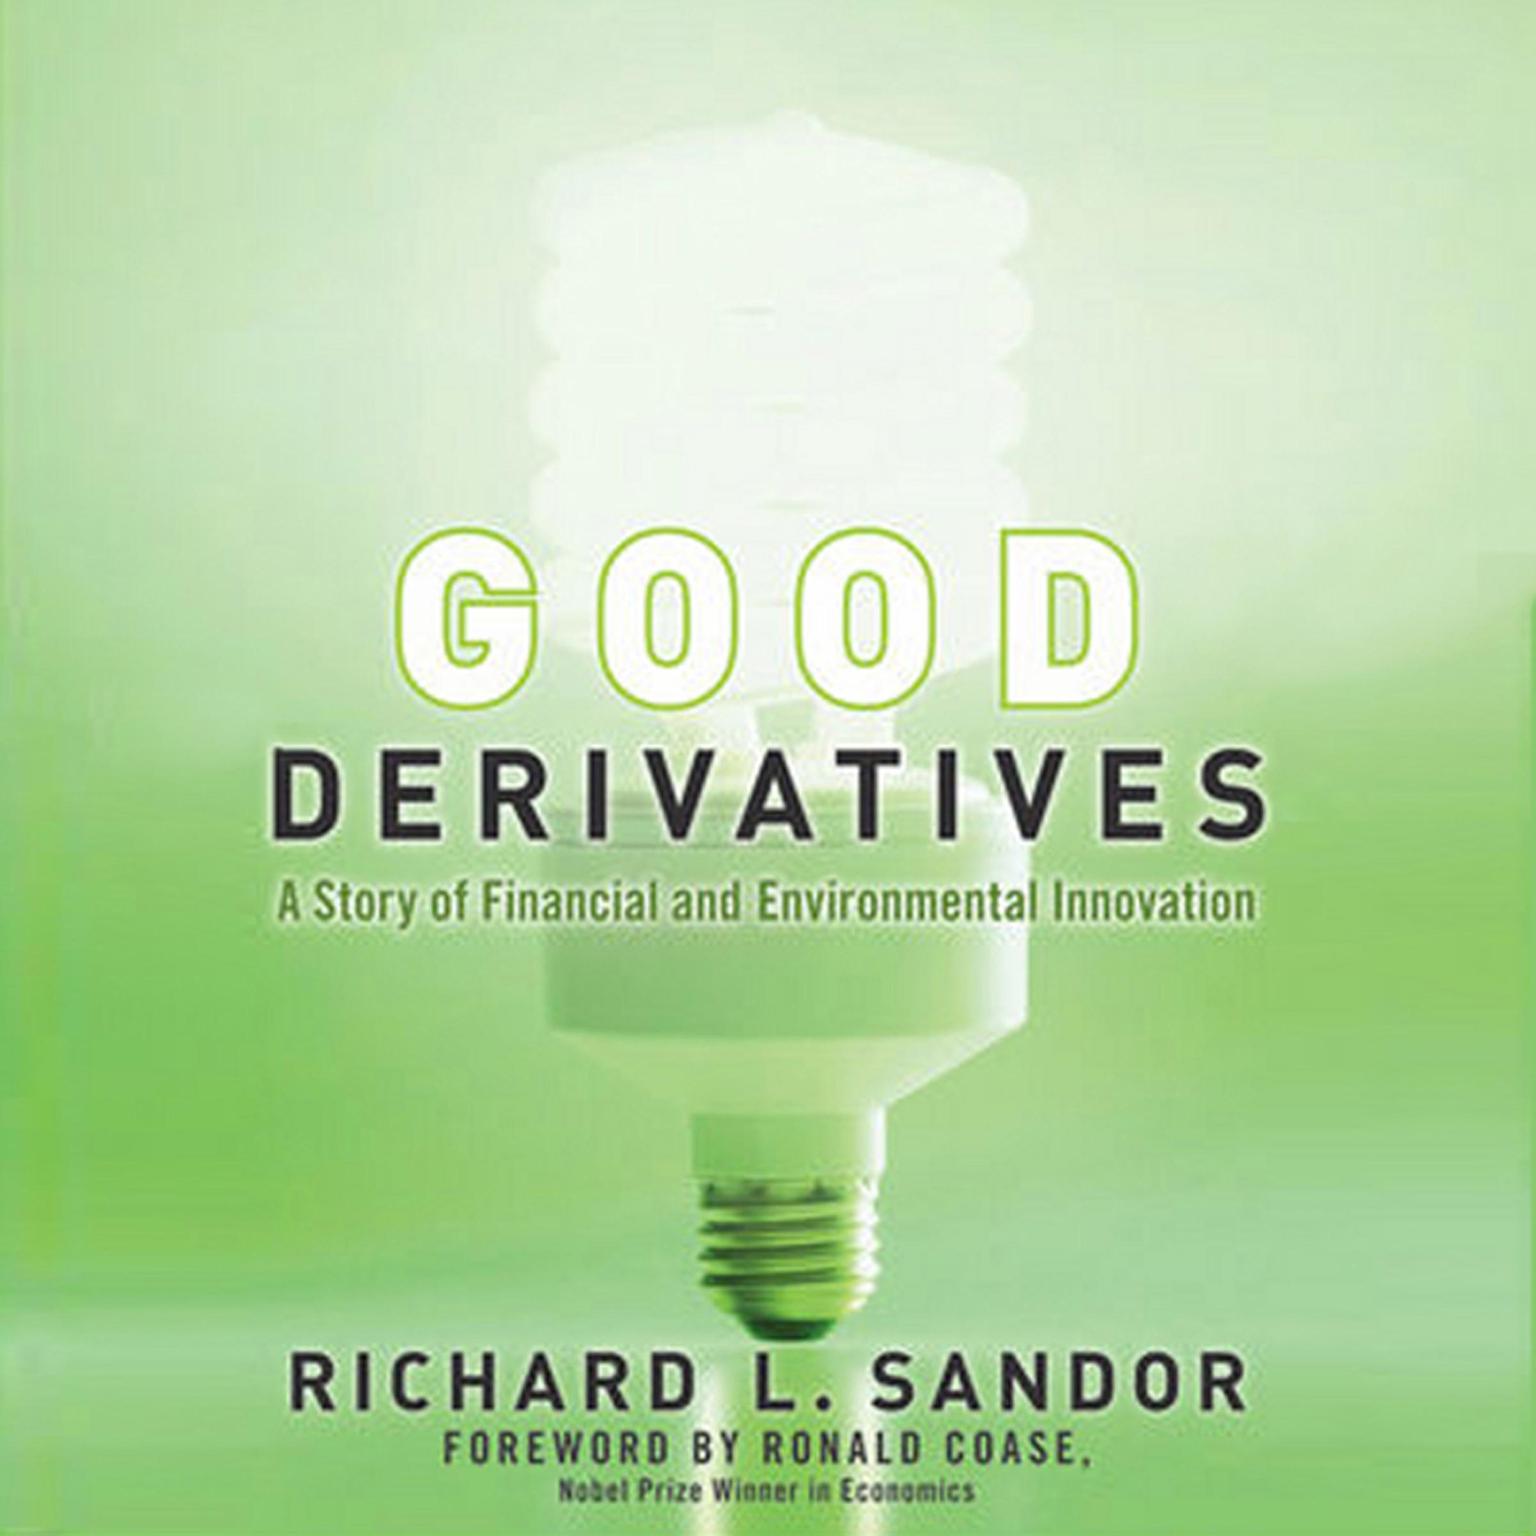 Good Derivatives: A Story of Financial and Environmental Innovation Audiobook, by Richard L Sandor